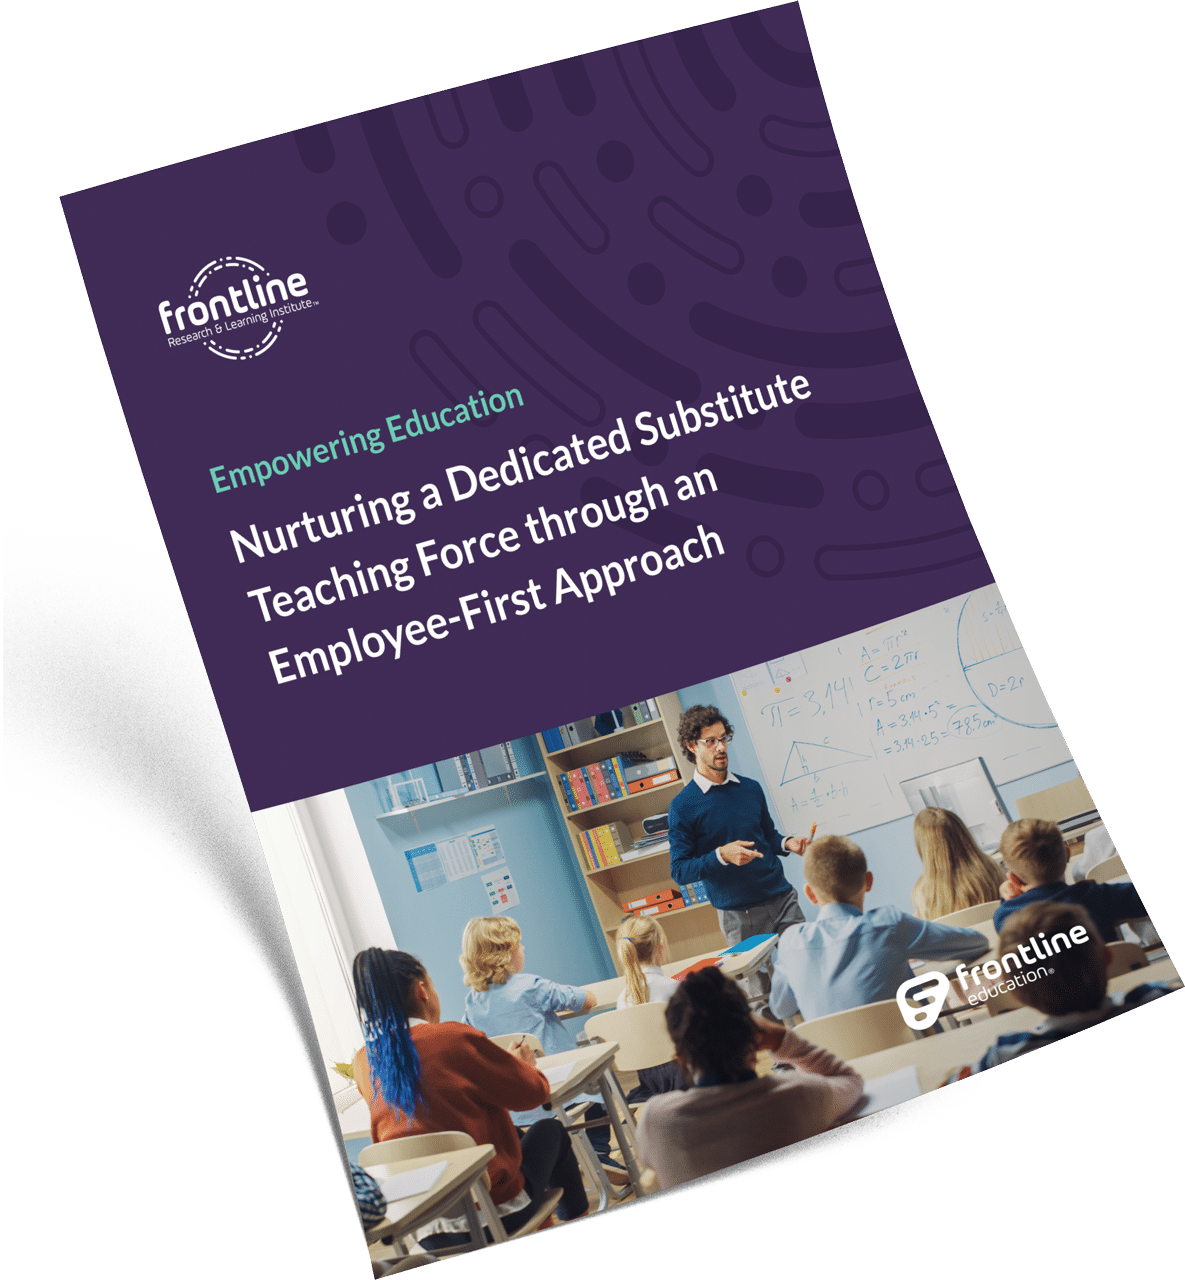 Empowering Education: Nurturing a Dedicated Substitute Teaching Force through an Employee-First Approach Mockup